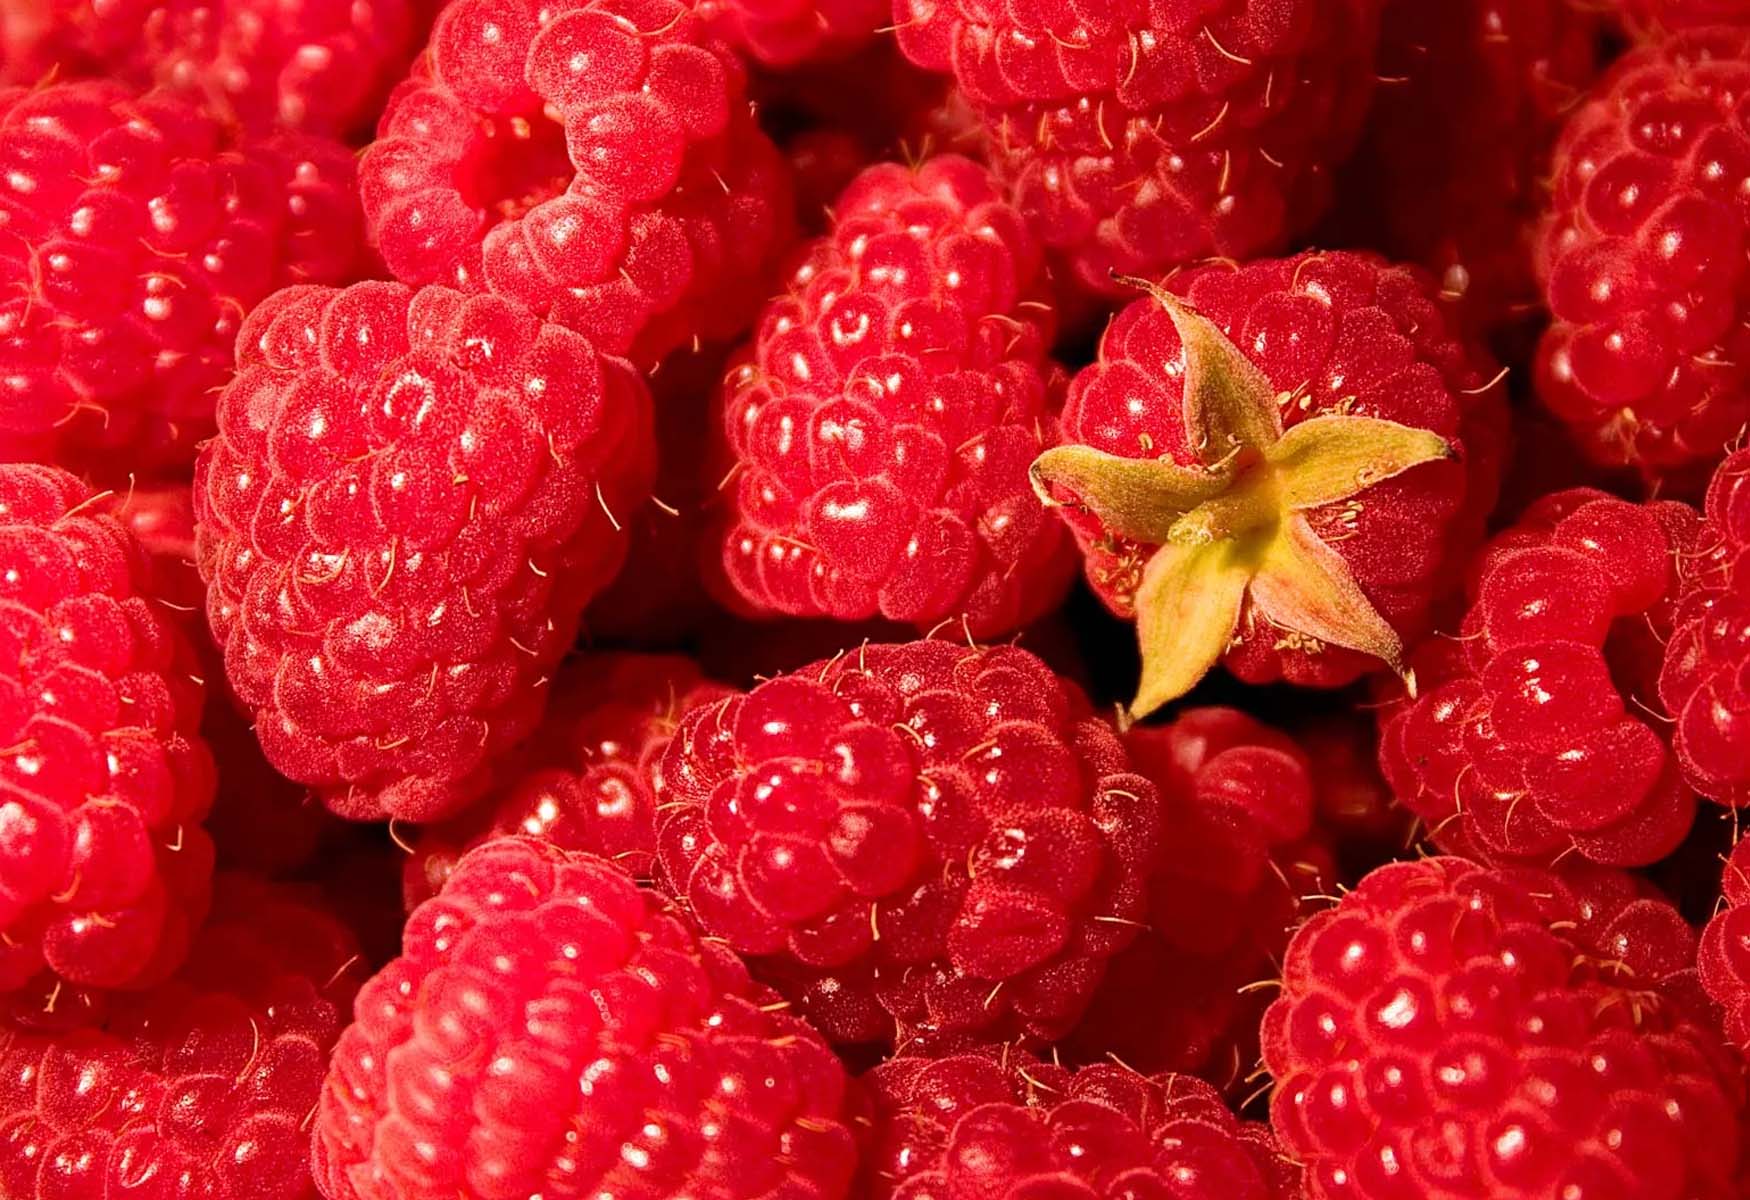 11-fun-facts-about-raspberries